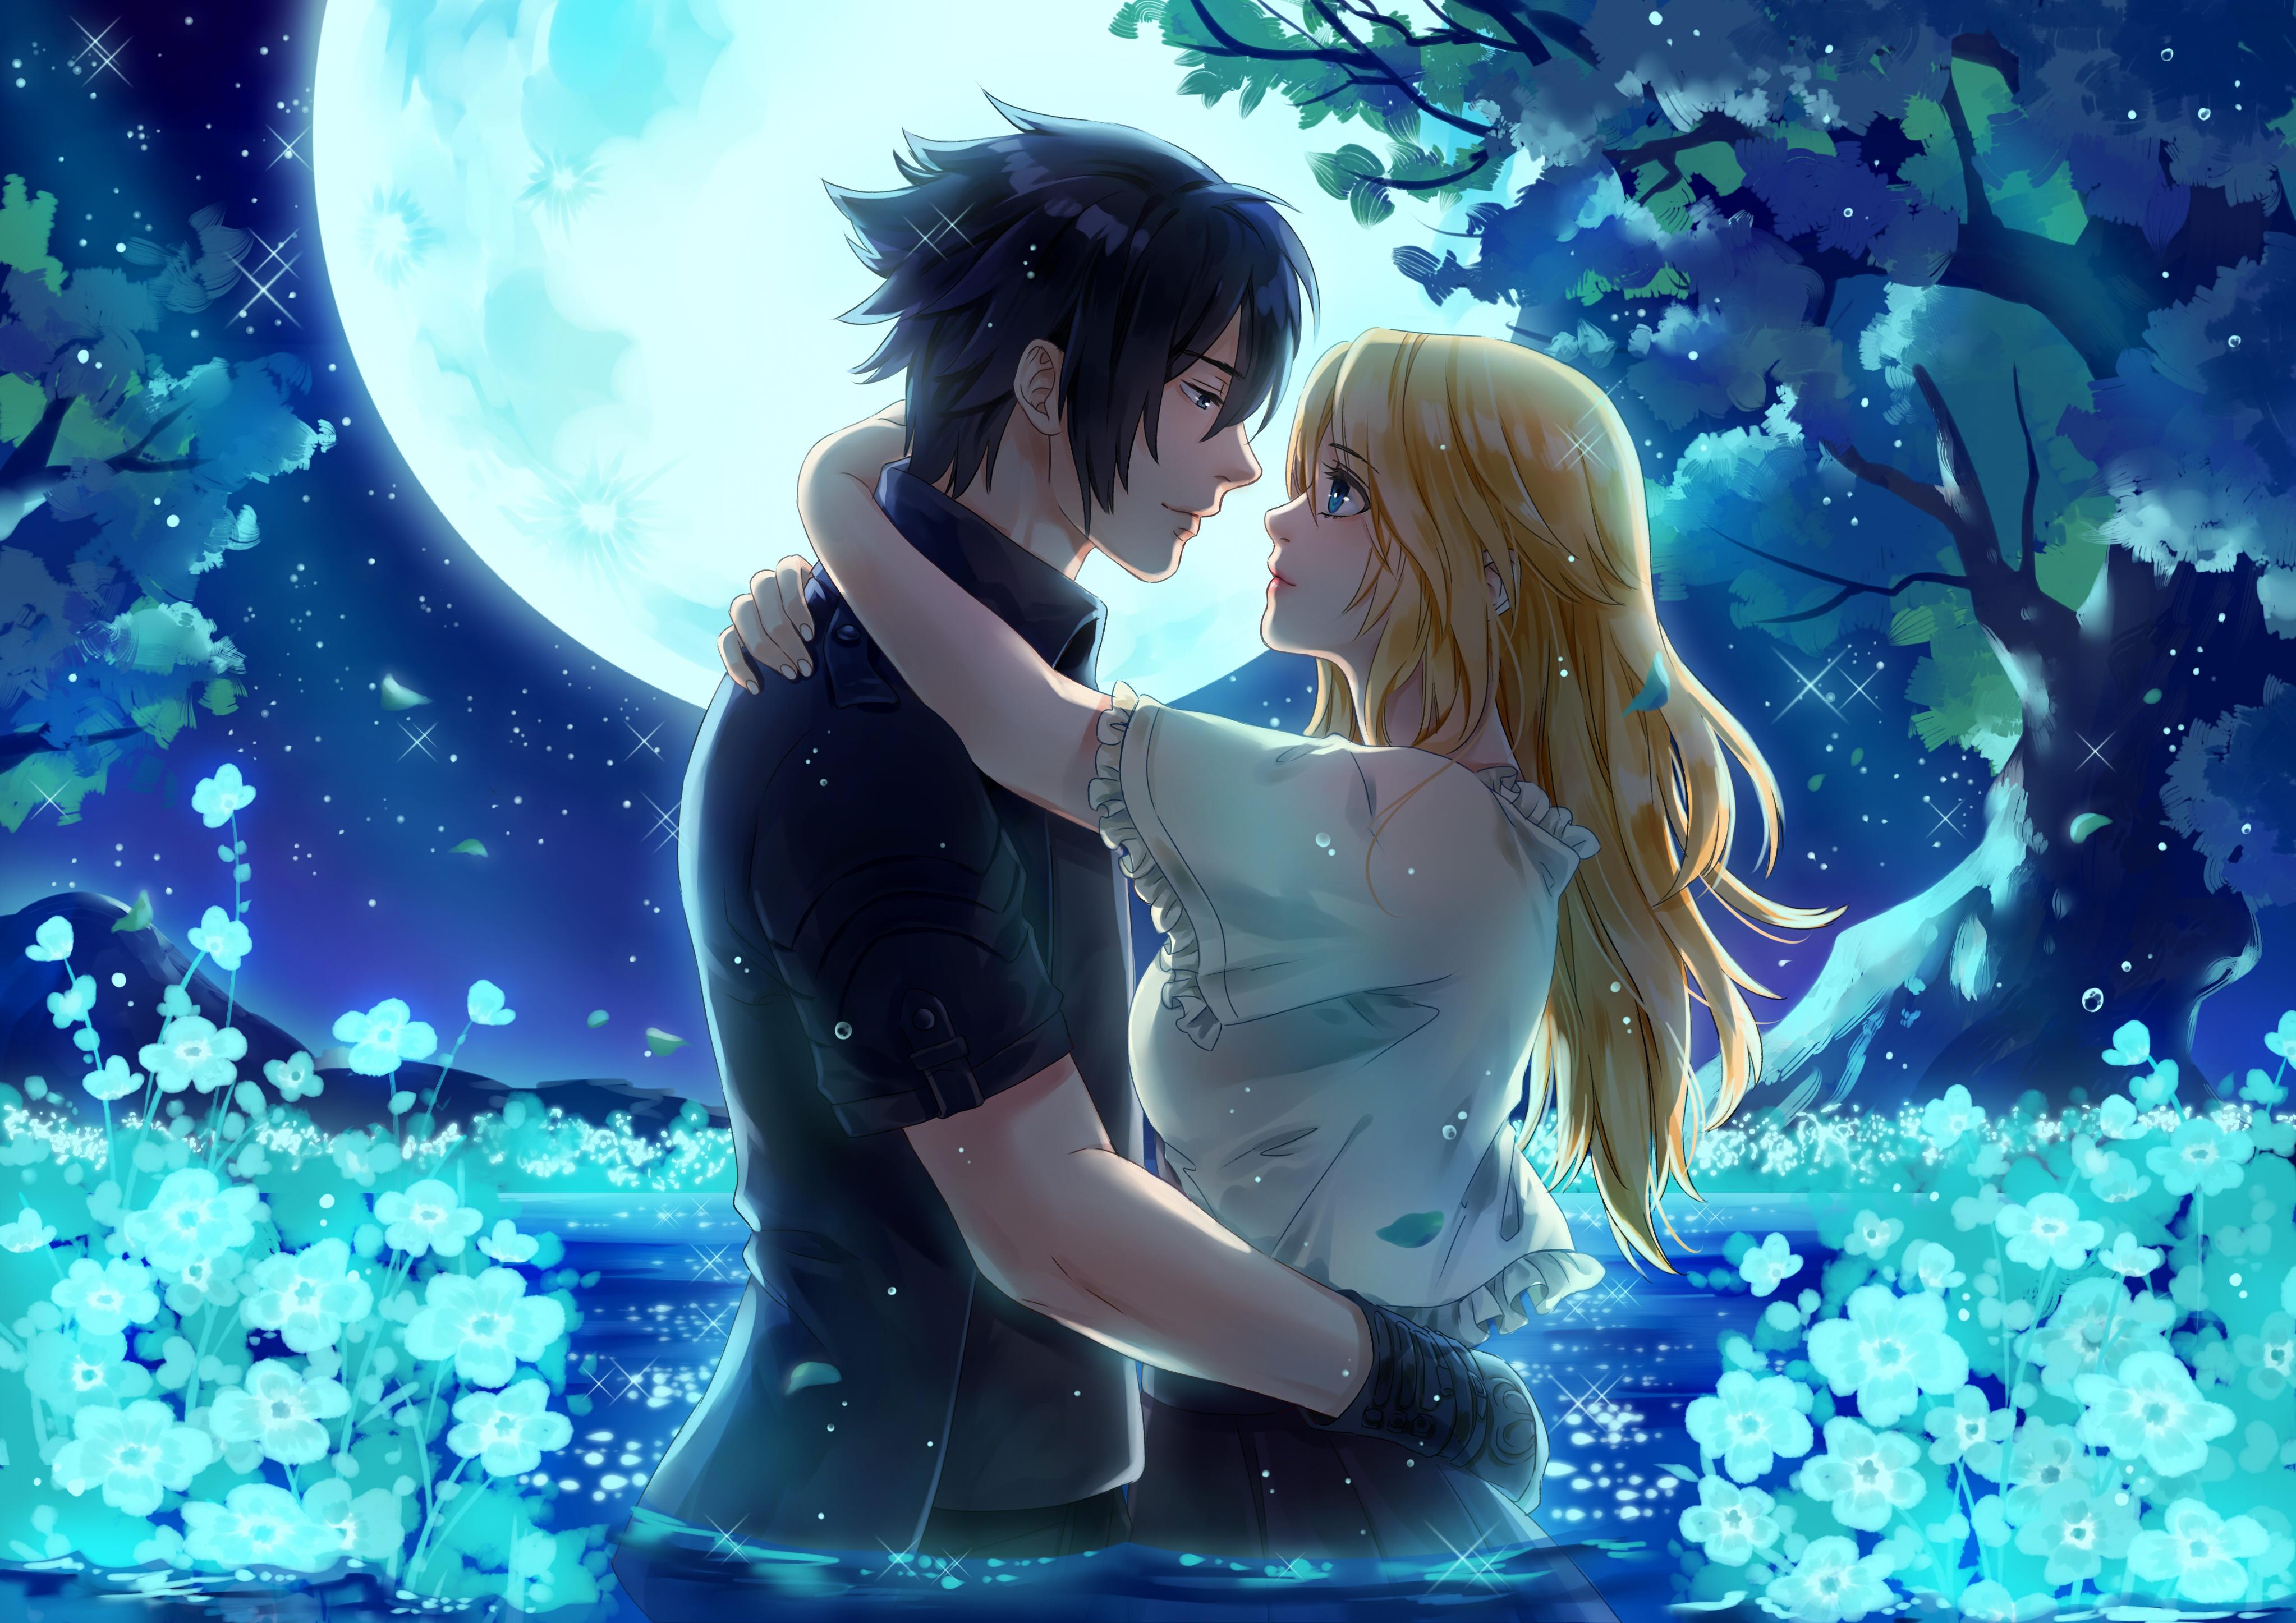 HD wallpaper, Couple Wallpapers, 5K Wallpapers, Final Fantasy Wallpapers, Digital Art Wallpapers, Hd Wallpapers, Deviantart Wallpapers, Artwork Wallpapers, Noctis And Stella From Final Fantasy Xv Under The Moon, Games Wallpapers, Love Wallpapers, 4K Wallpapers, Artist Wallpapers, Final Fantasy Xv Wallpapers